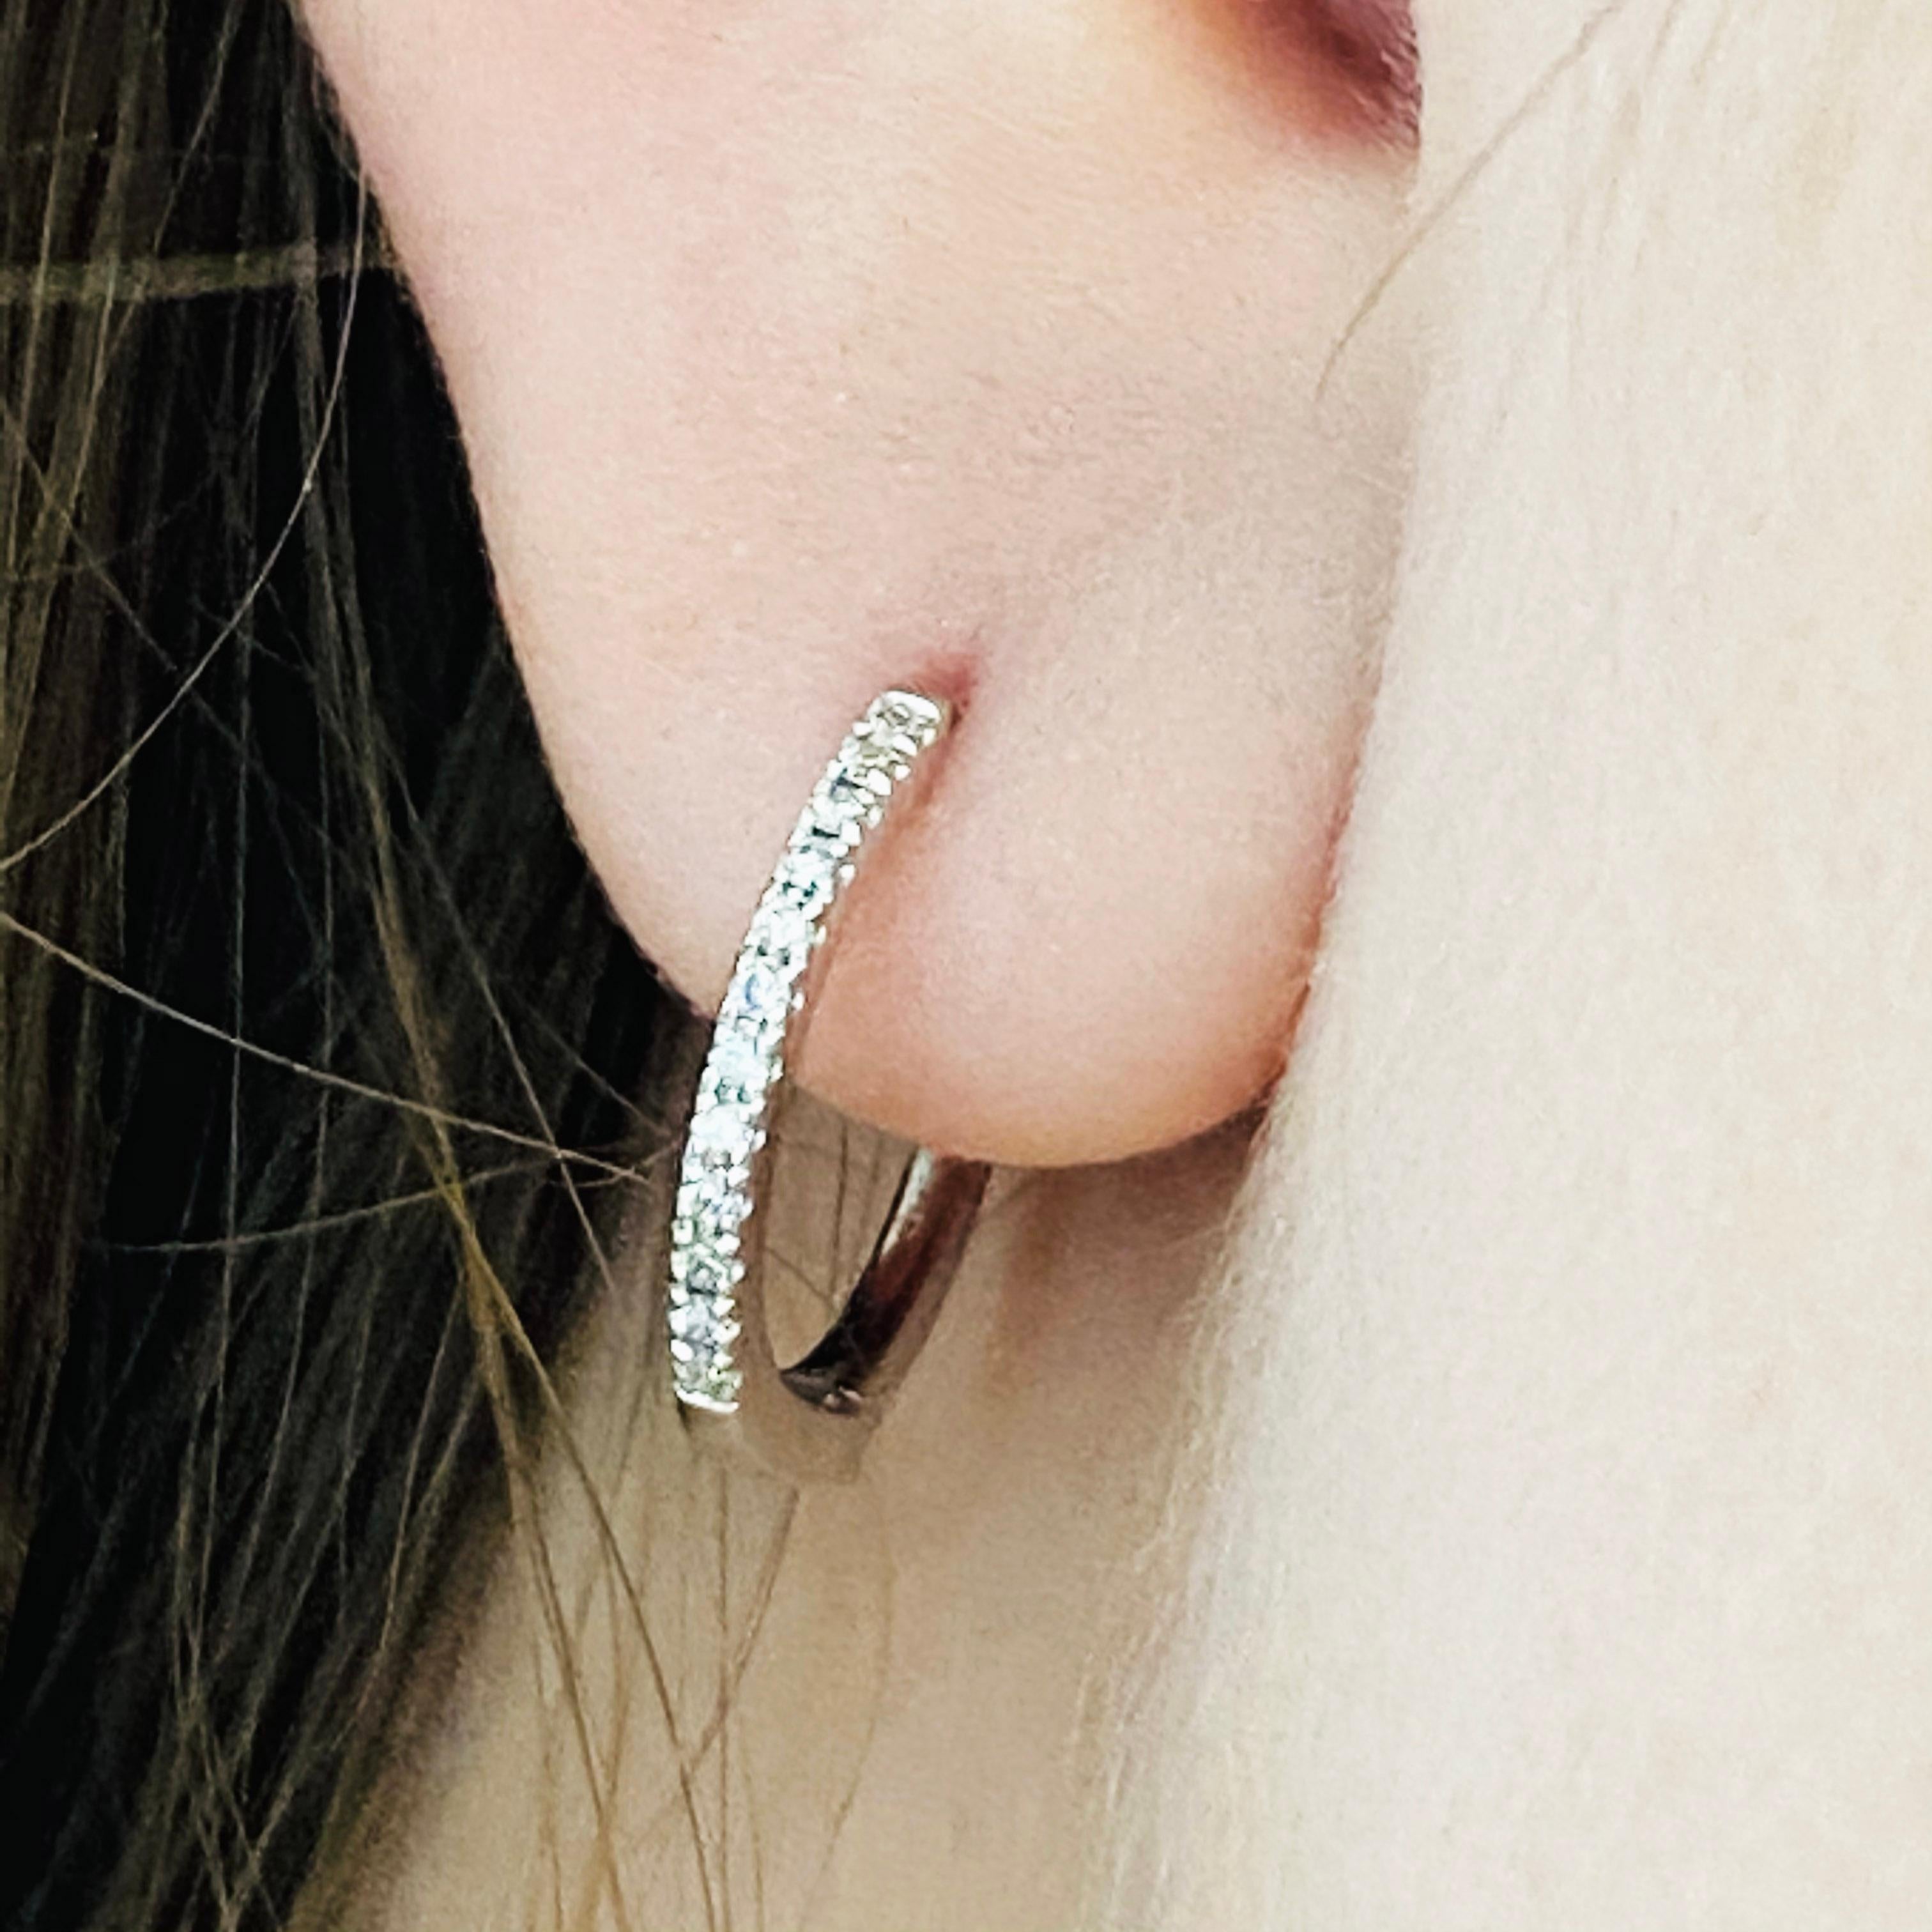 Our 2020 most popular earrings! These stunning polished 18k white gold diamond hoops provide a look that is both trendy and classic. While they were once worn by kings and queens to signify power and social status, hoop earrings are now considered a